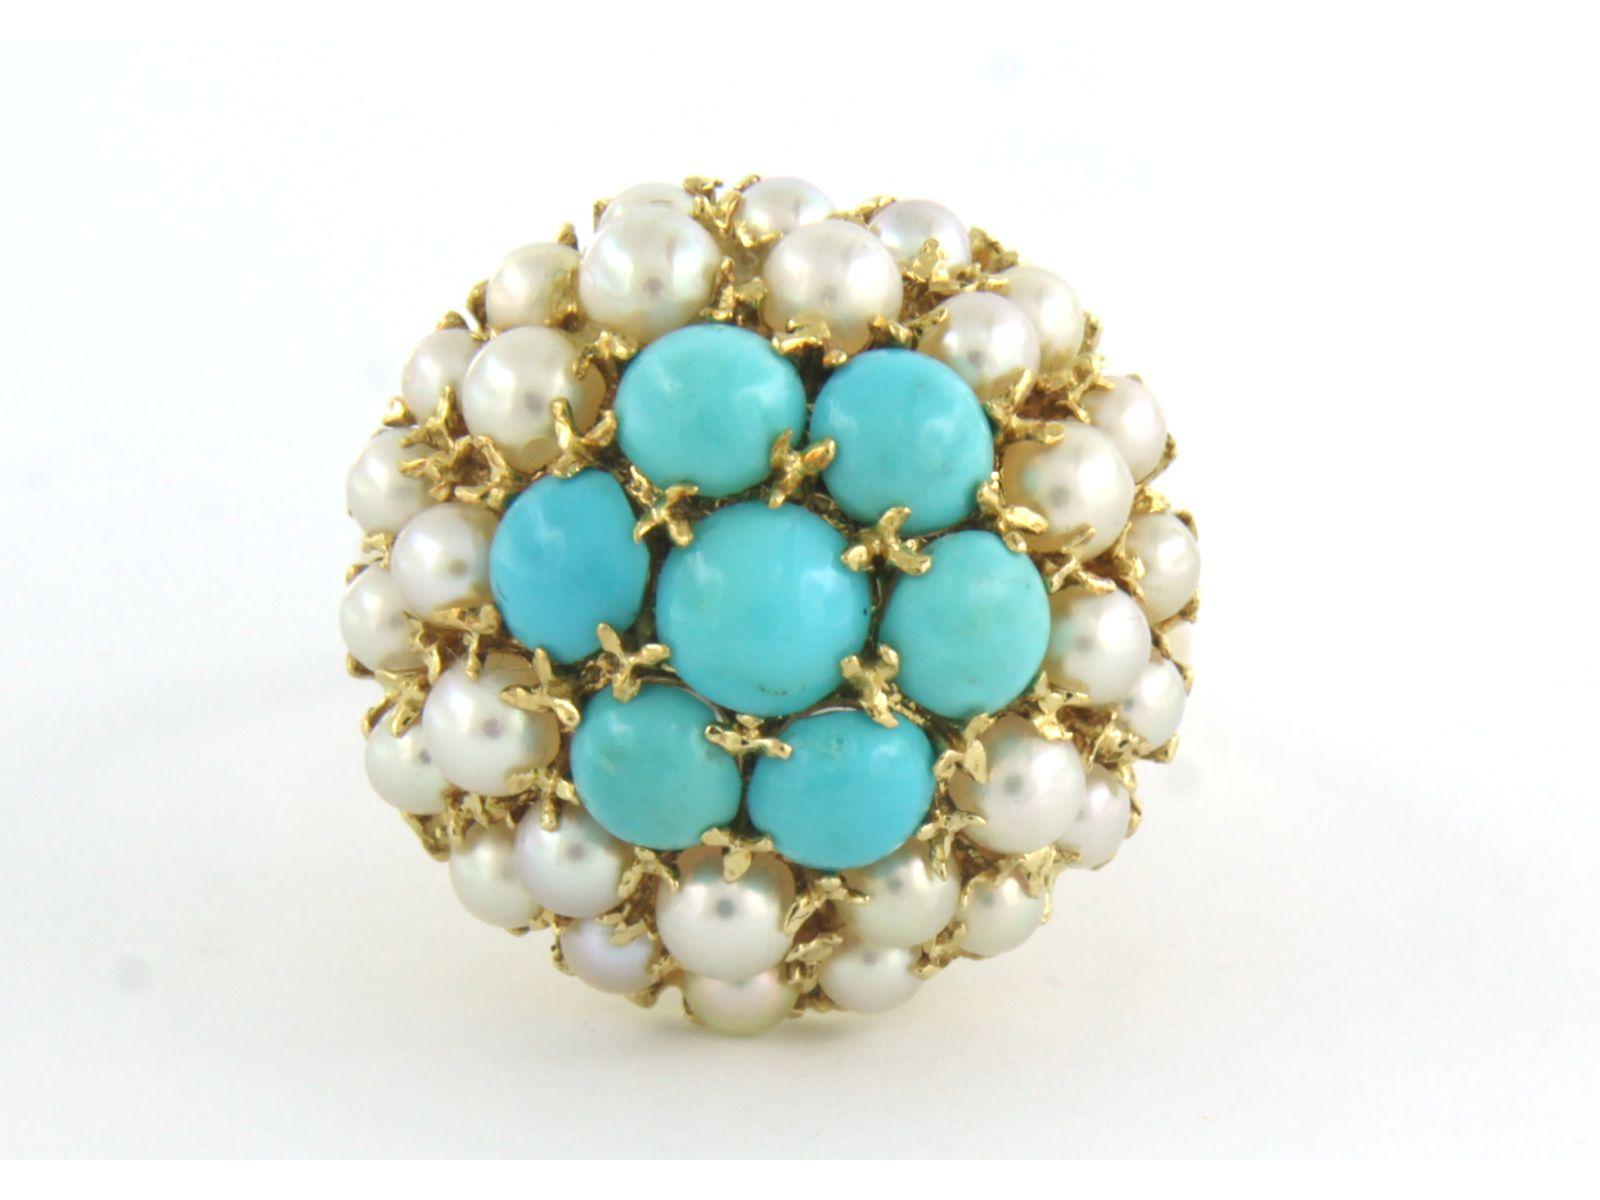 18 kt yellow gold ring set with turquoise and pearls - ring size U.S. 8 - EU 18(57)

detailed description

the top of the ring is 1.9 cm wide by 1.3 cm high

weight 8.6 grams

ring size U.S. 8 - EU 18(57), ring can be enlarged or reduced by a few